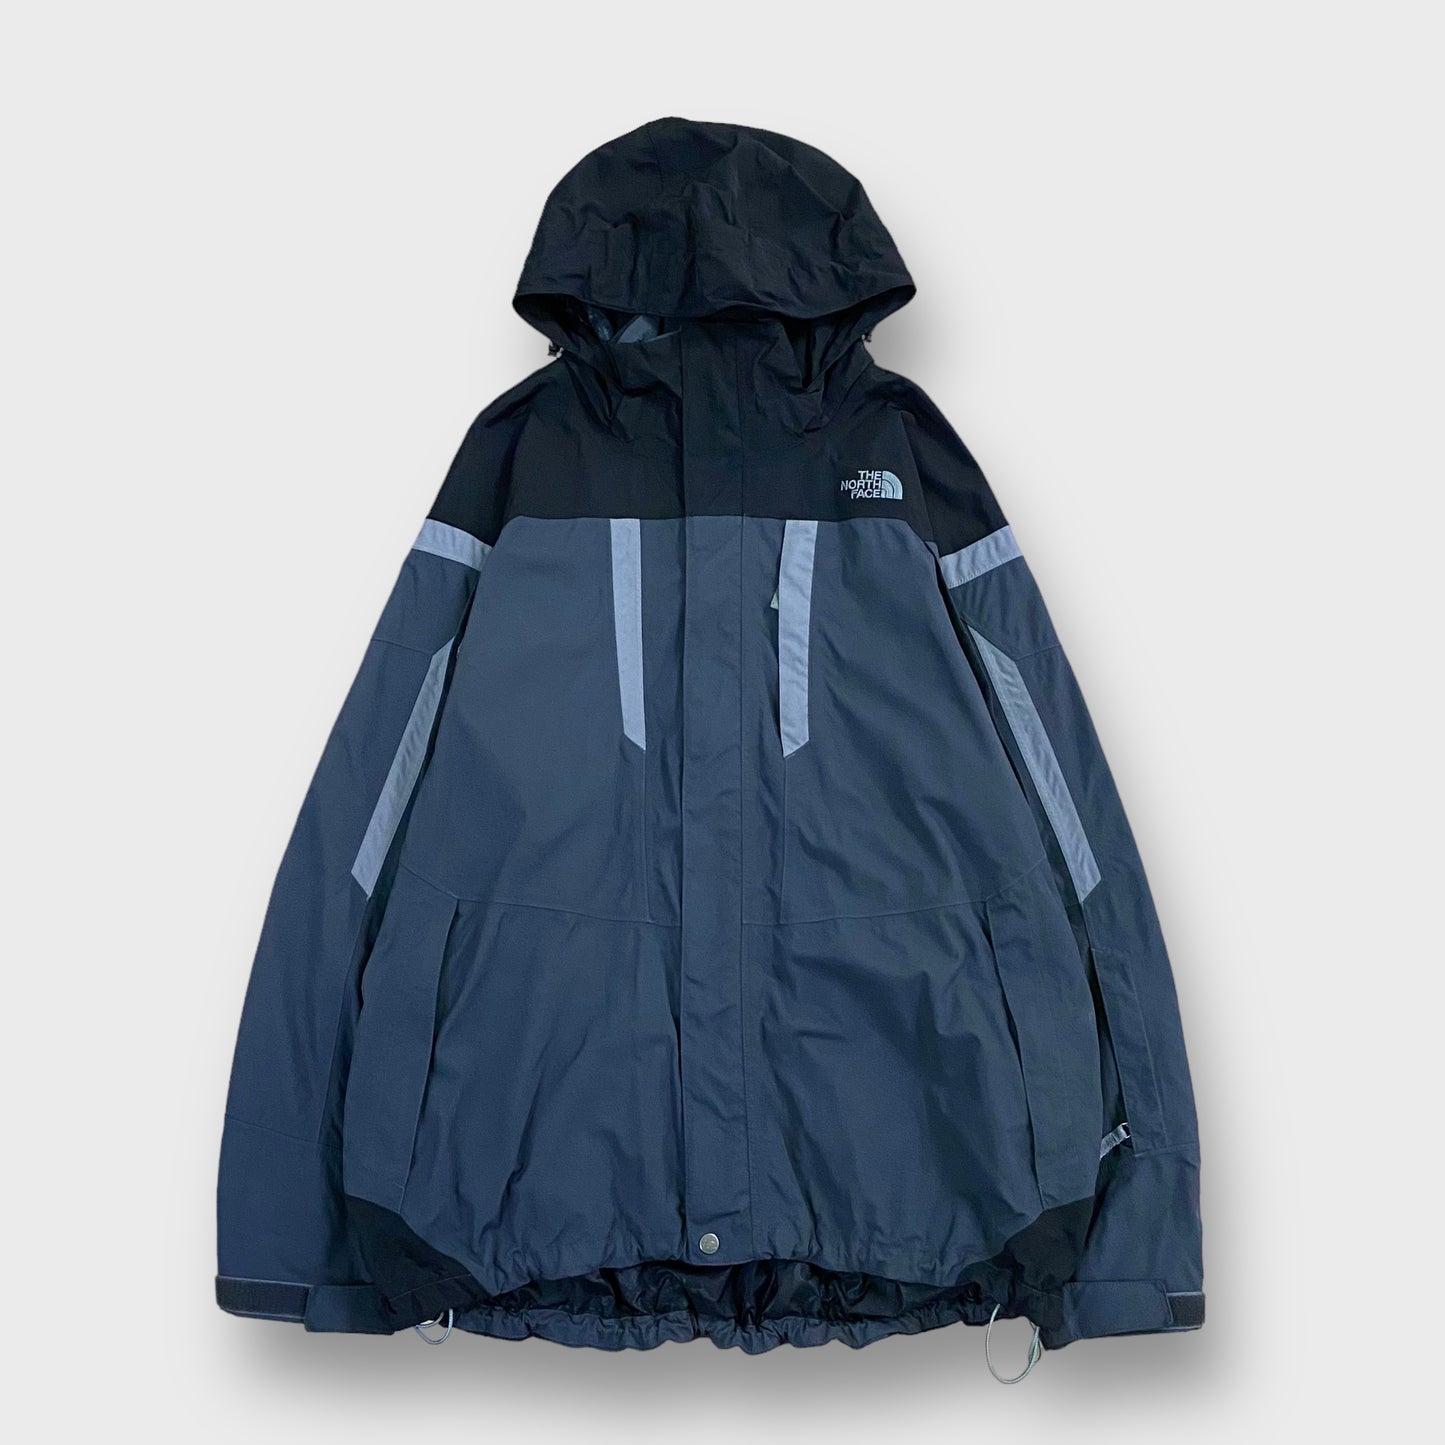 "THE NORTH FACE" HyVent mountain jacket